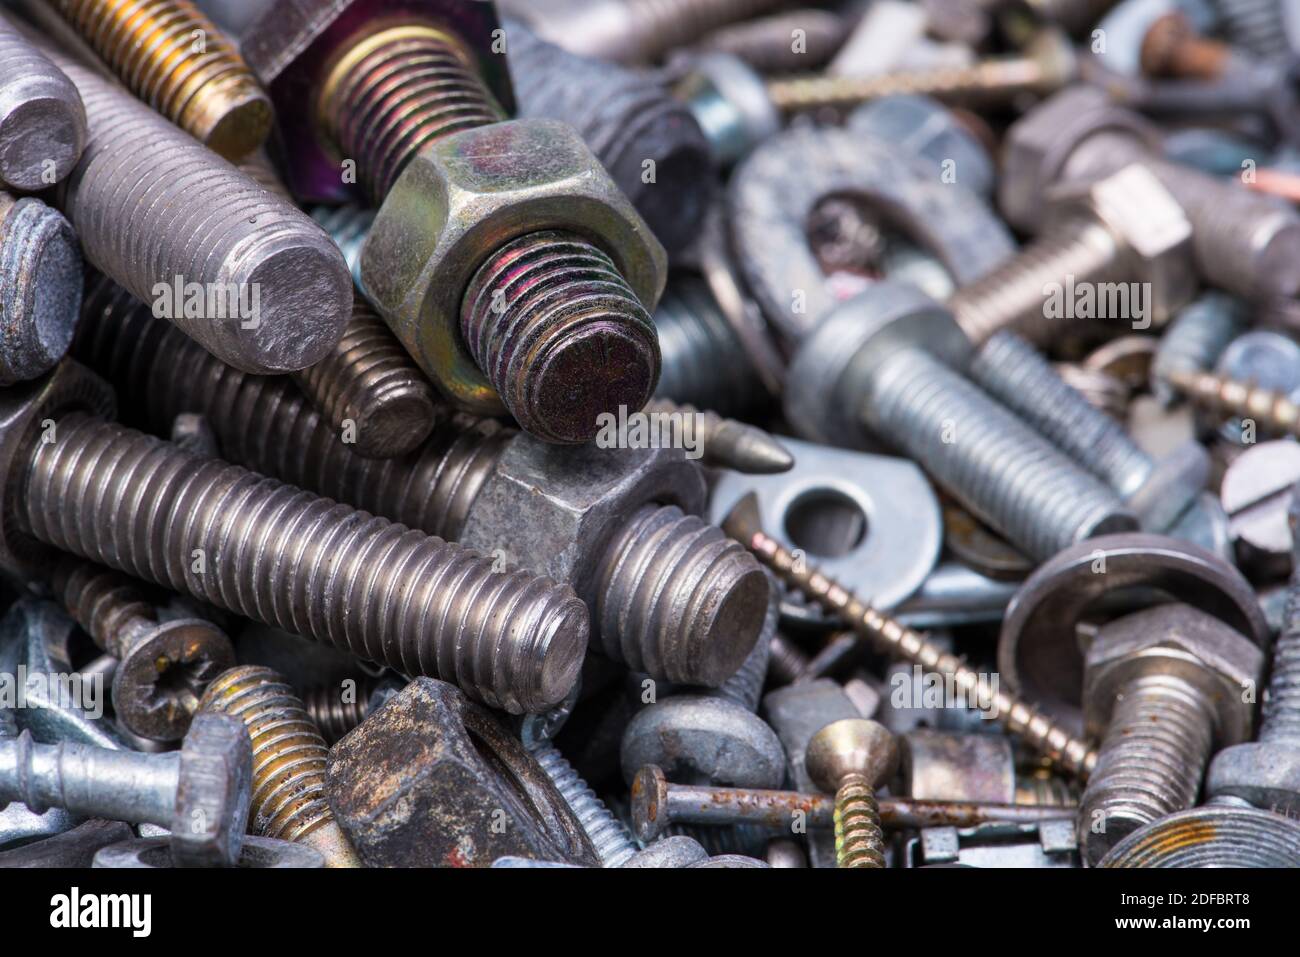 Pile of bolts, nuts and screws Stock Photo